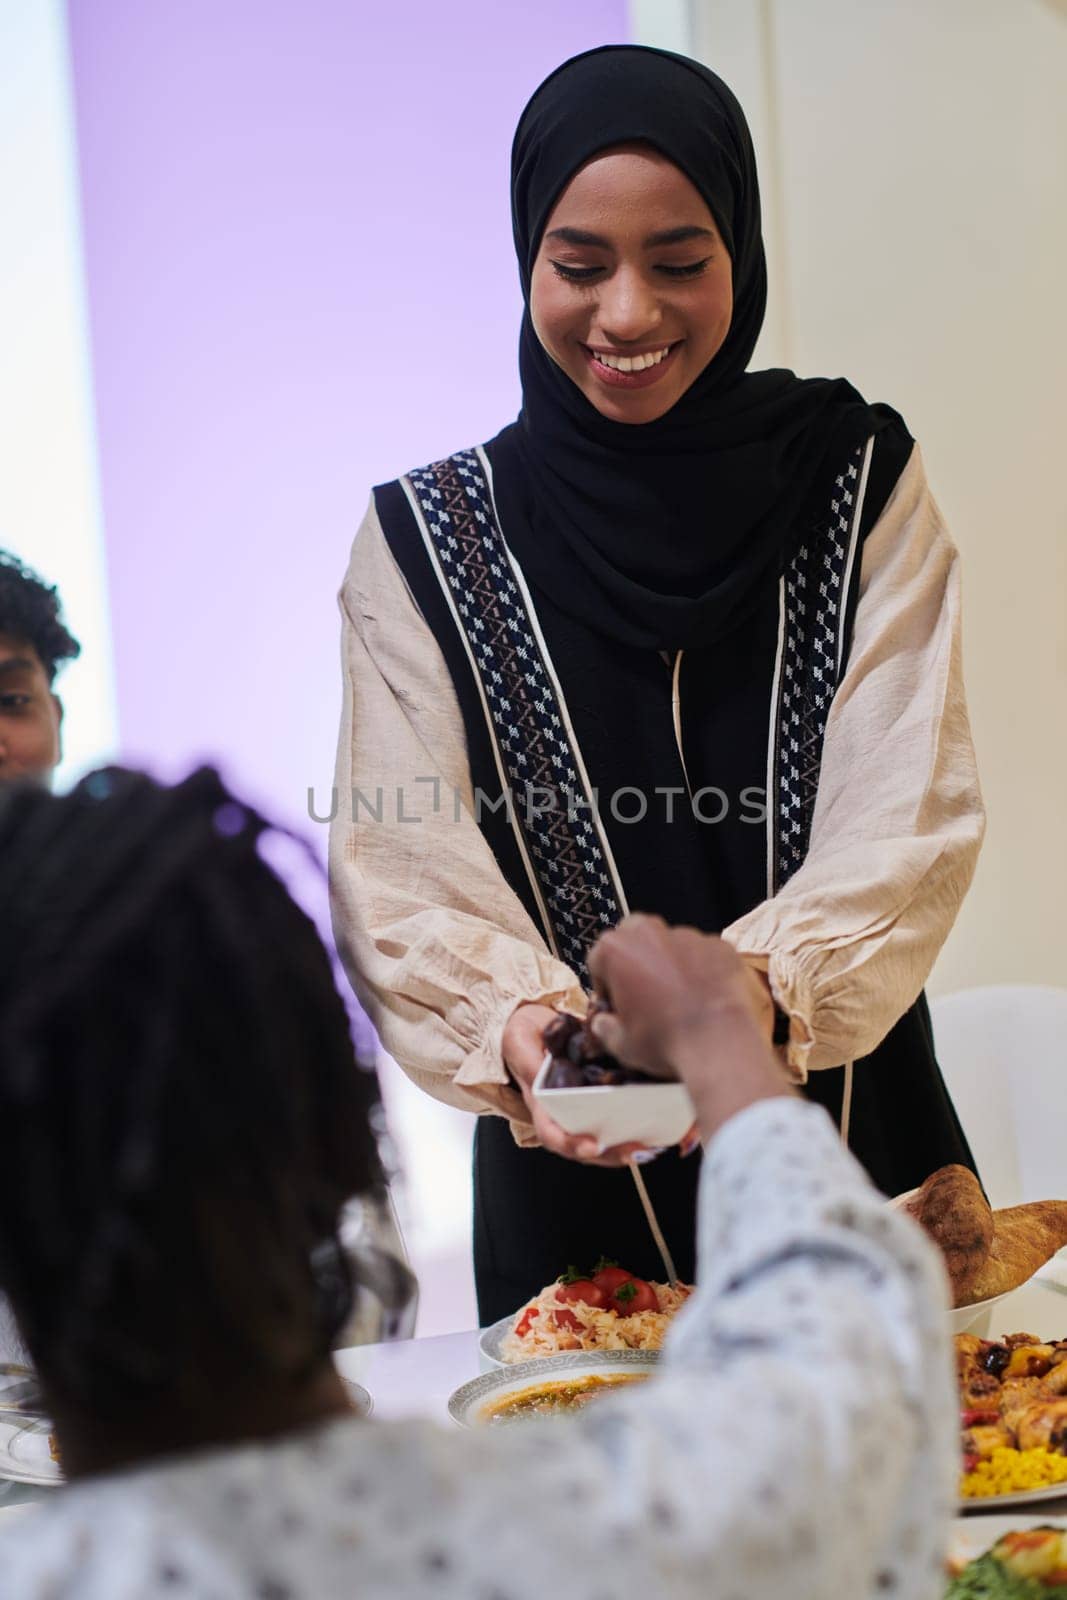 In a heartwarming scene during the sacred month of Ramadan, a traditional Muslim woman offers dates to her family gathered around the table, exemplifying the spirit of unity, generosity, and cultural richness during this festive and spiritual occasion.